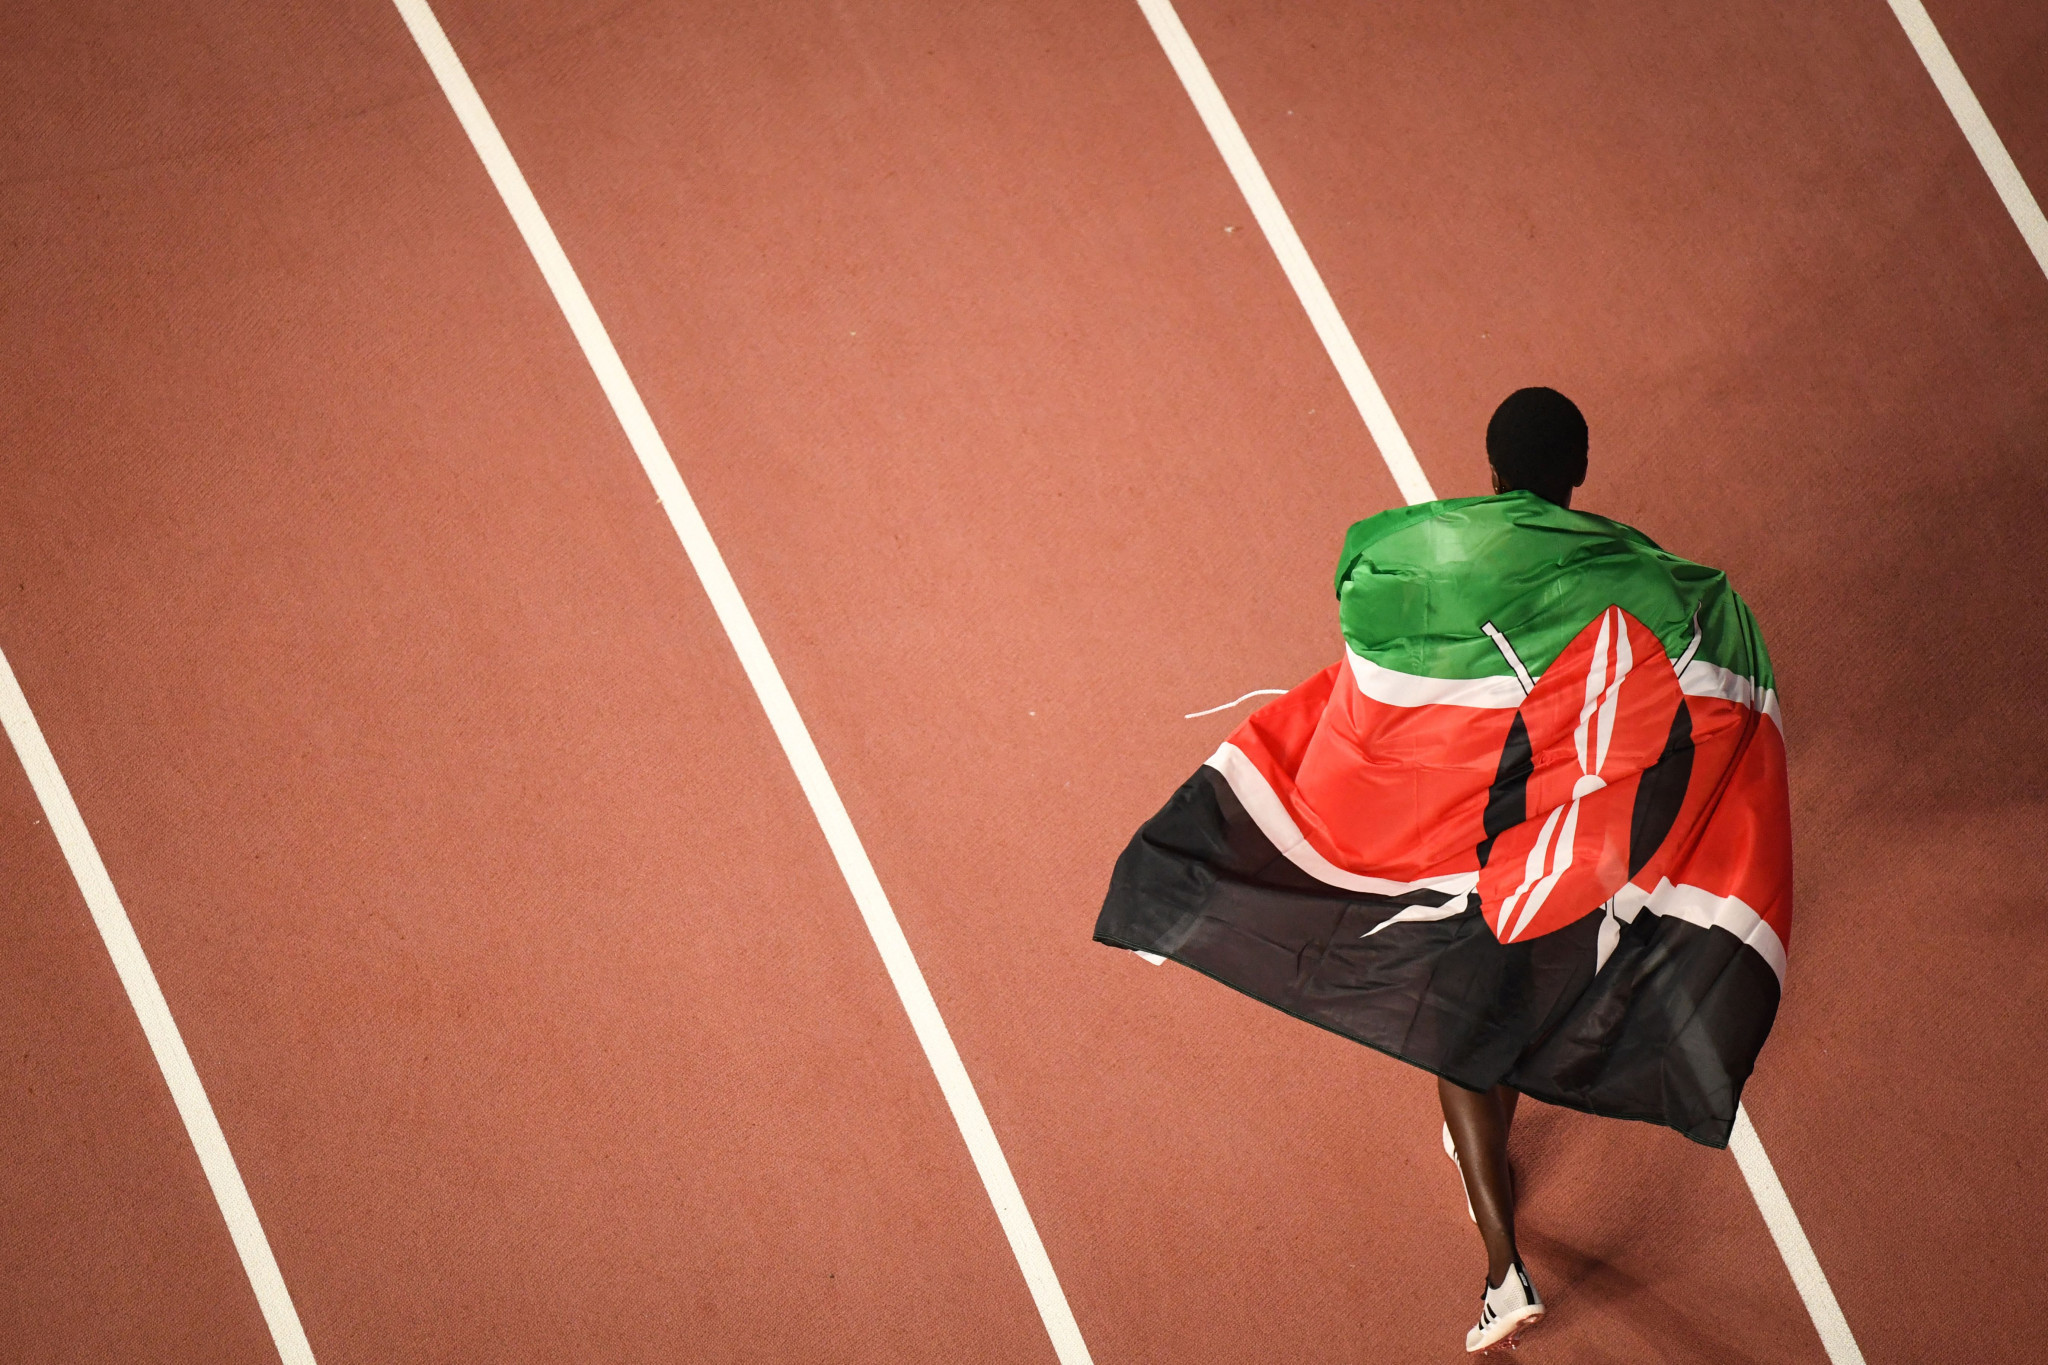 Kenya’s Cabinet Secretary for Sports, Ababu Namwamba, addressing reports that his nation’s athletes could face a lengthy doping suspension, called for support rather than severe sanctions ©Getty Images